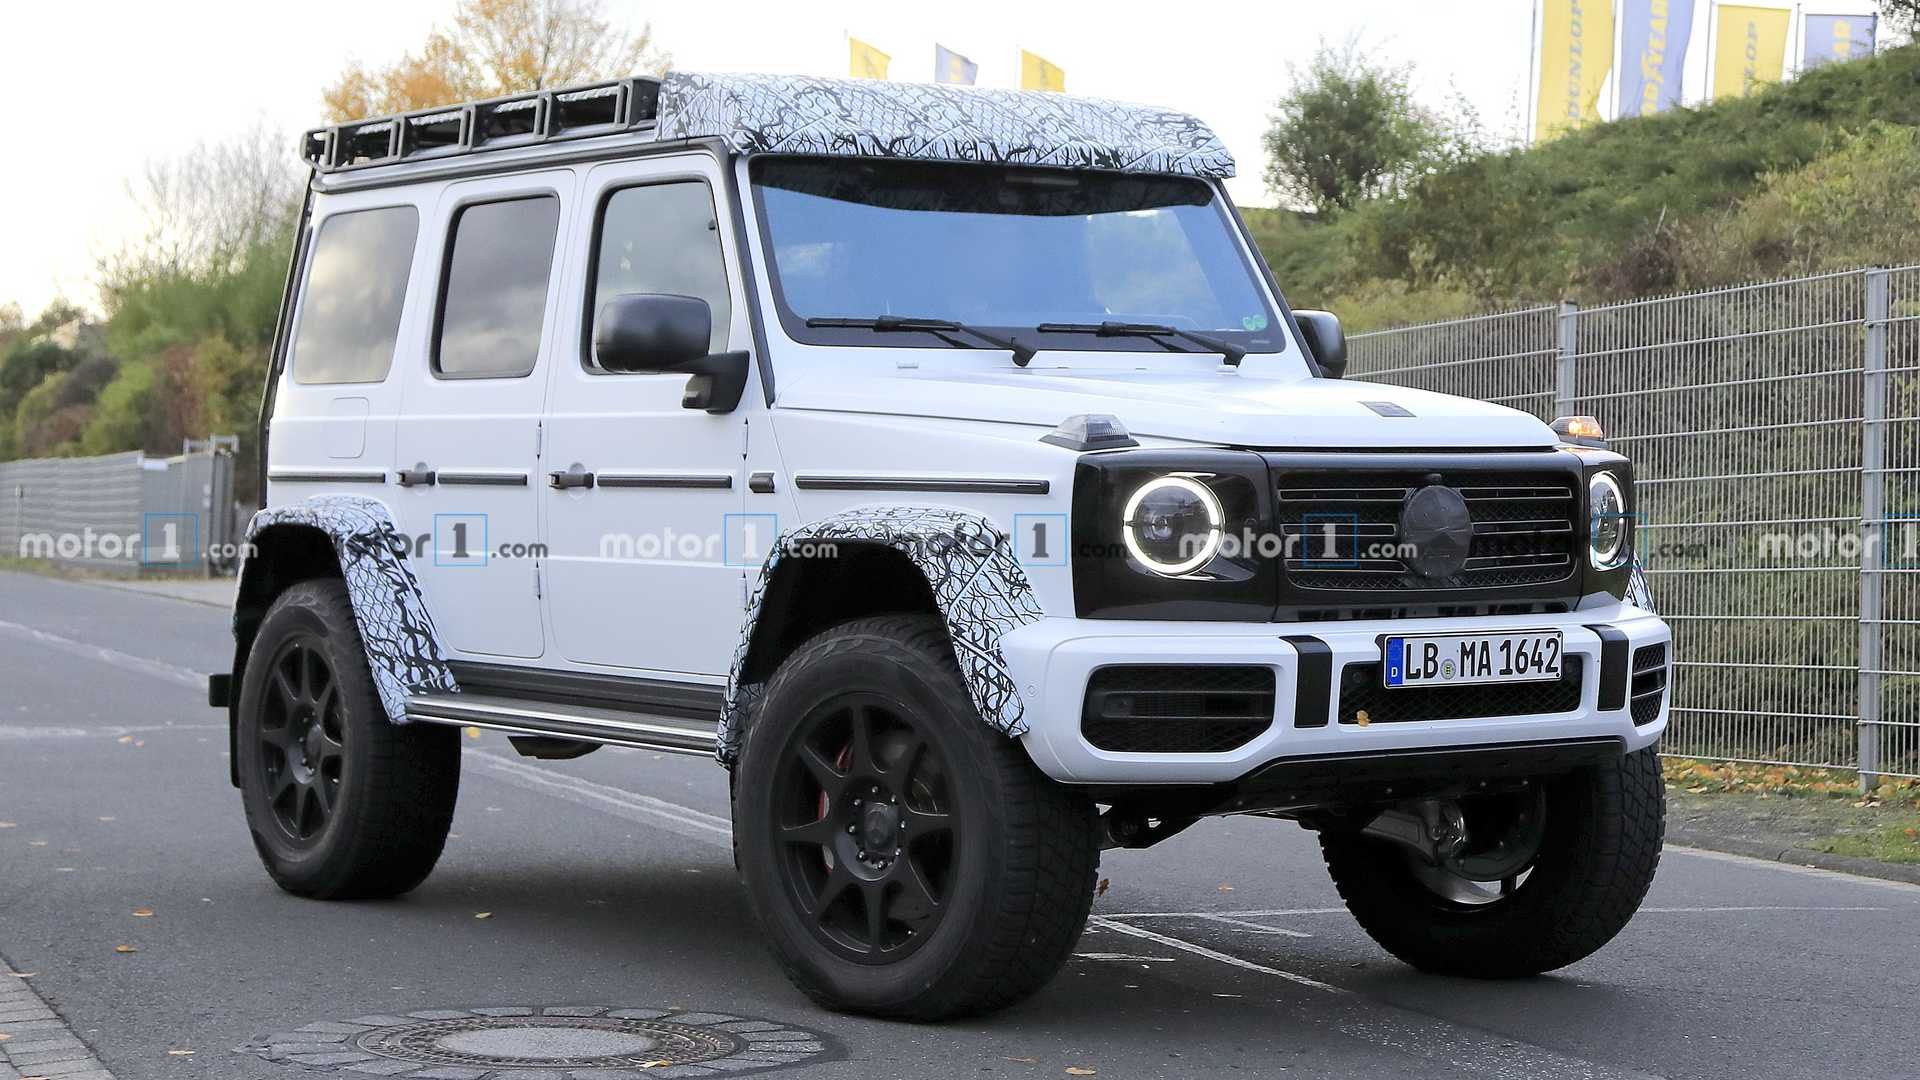 Mercedes G-Class 4x4 Squared Spied Riding Tall While Looking Brawny